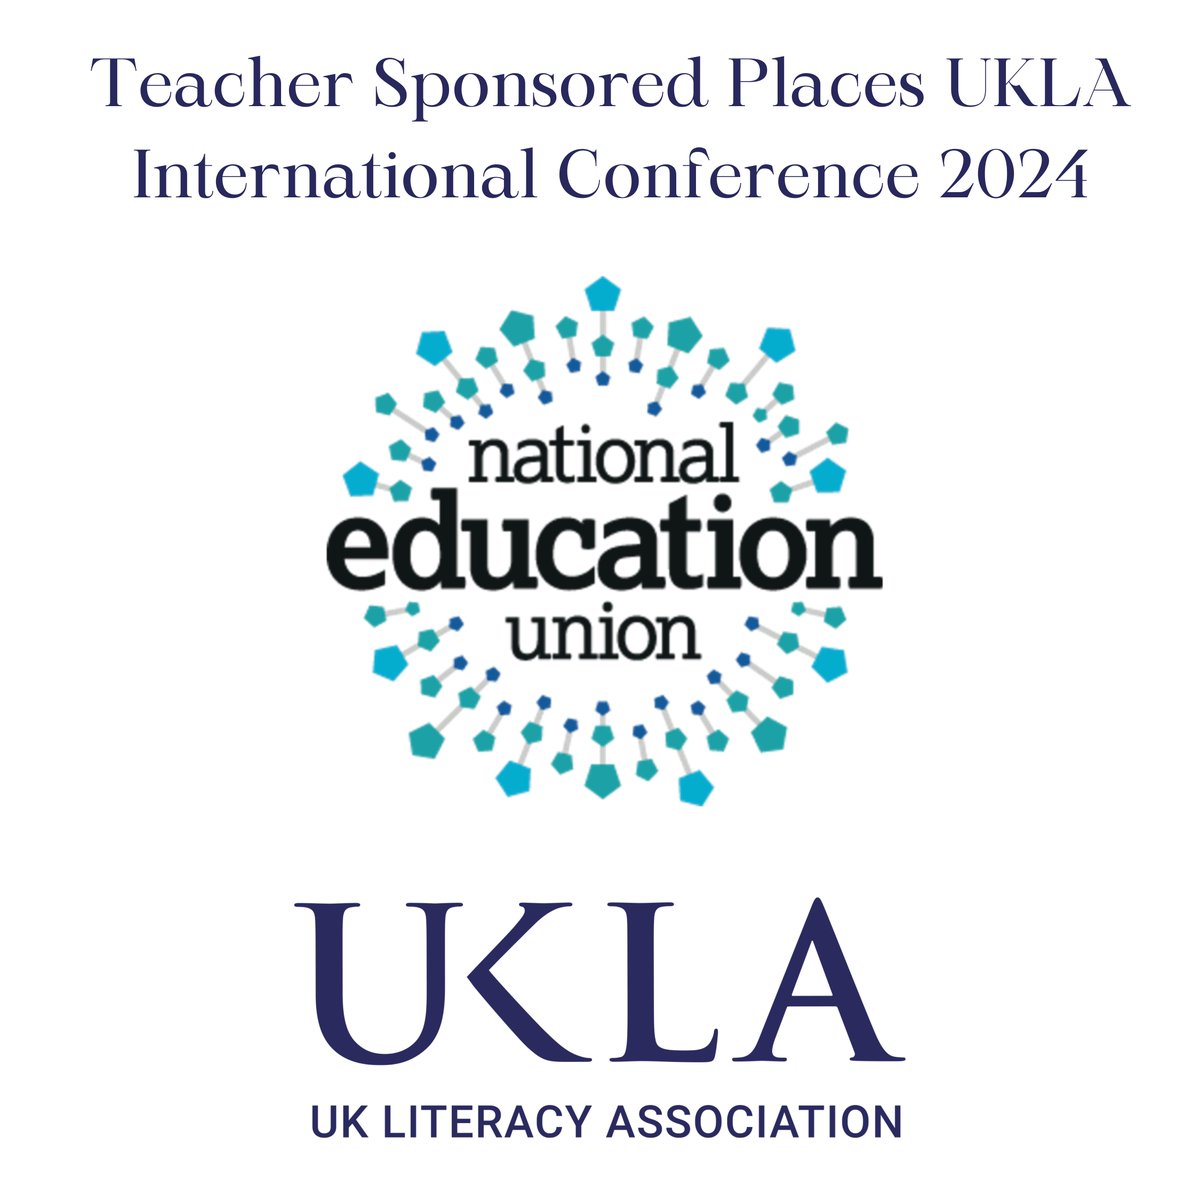 New for 2024. Generous NEU sponsorship enables us to offer 5 sponsored places for the #ukla24 International Conference University Sussex July 5- 7 . Submissions invited now from  #uklamembers- deadline March 18th @MollyHallNEU

Application-form-teachers - loom.ly/dkYPS8g